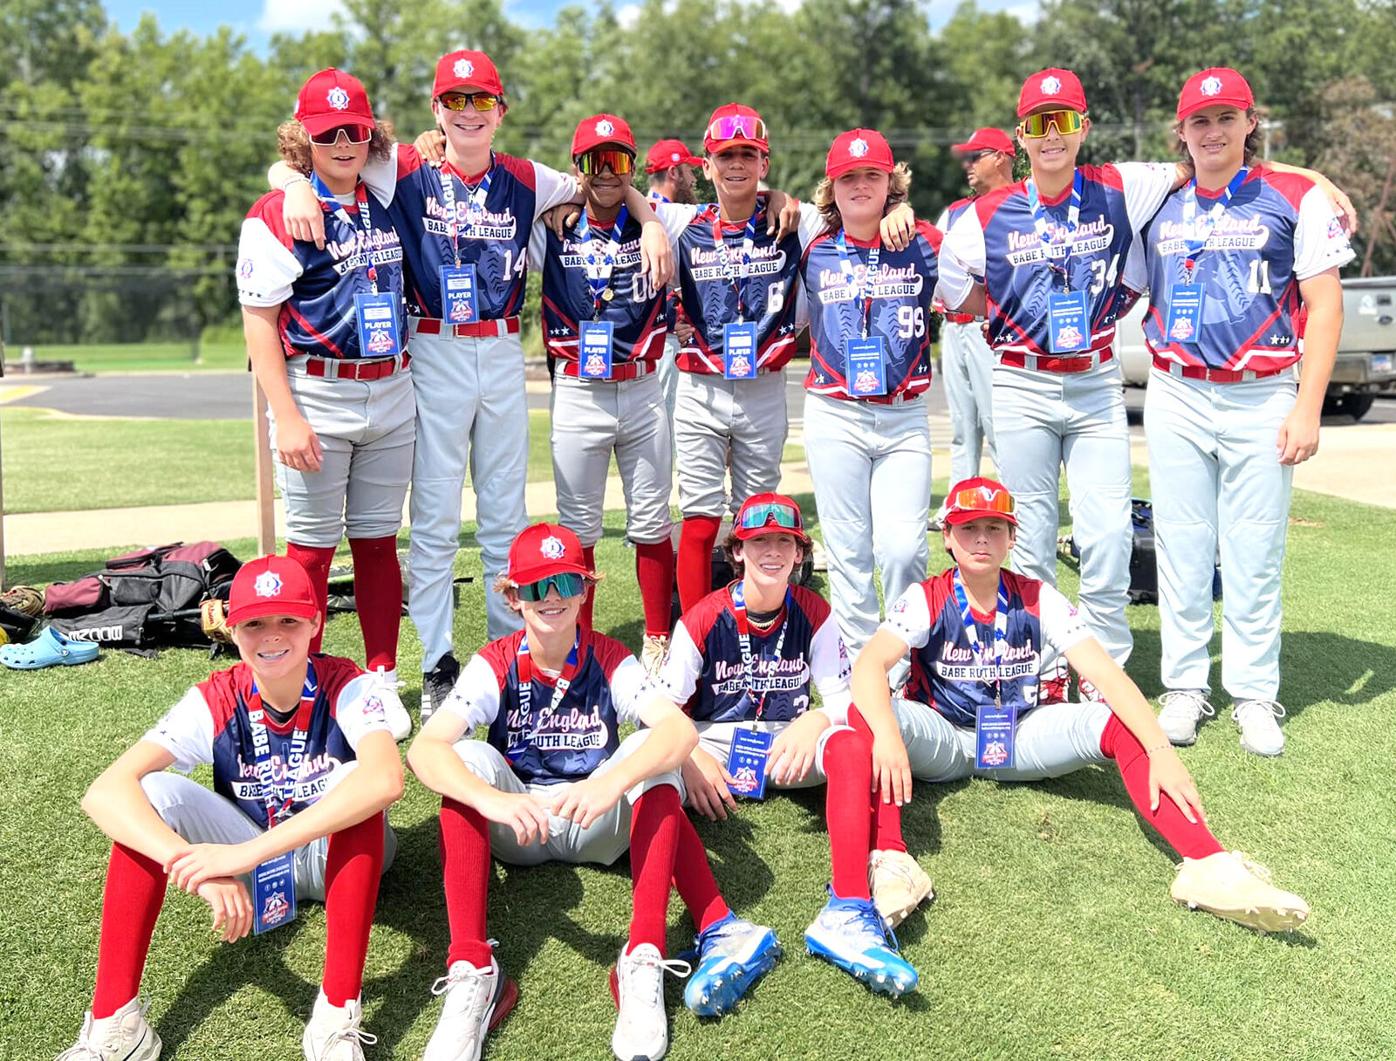 Team Iowa eliminated from Little League World Series after Texas loss